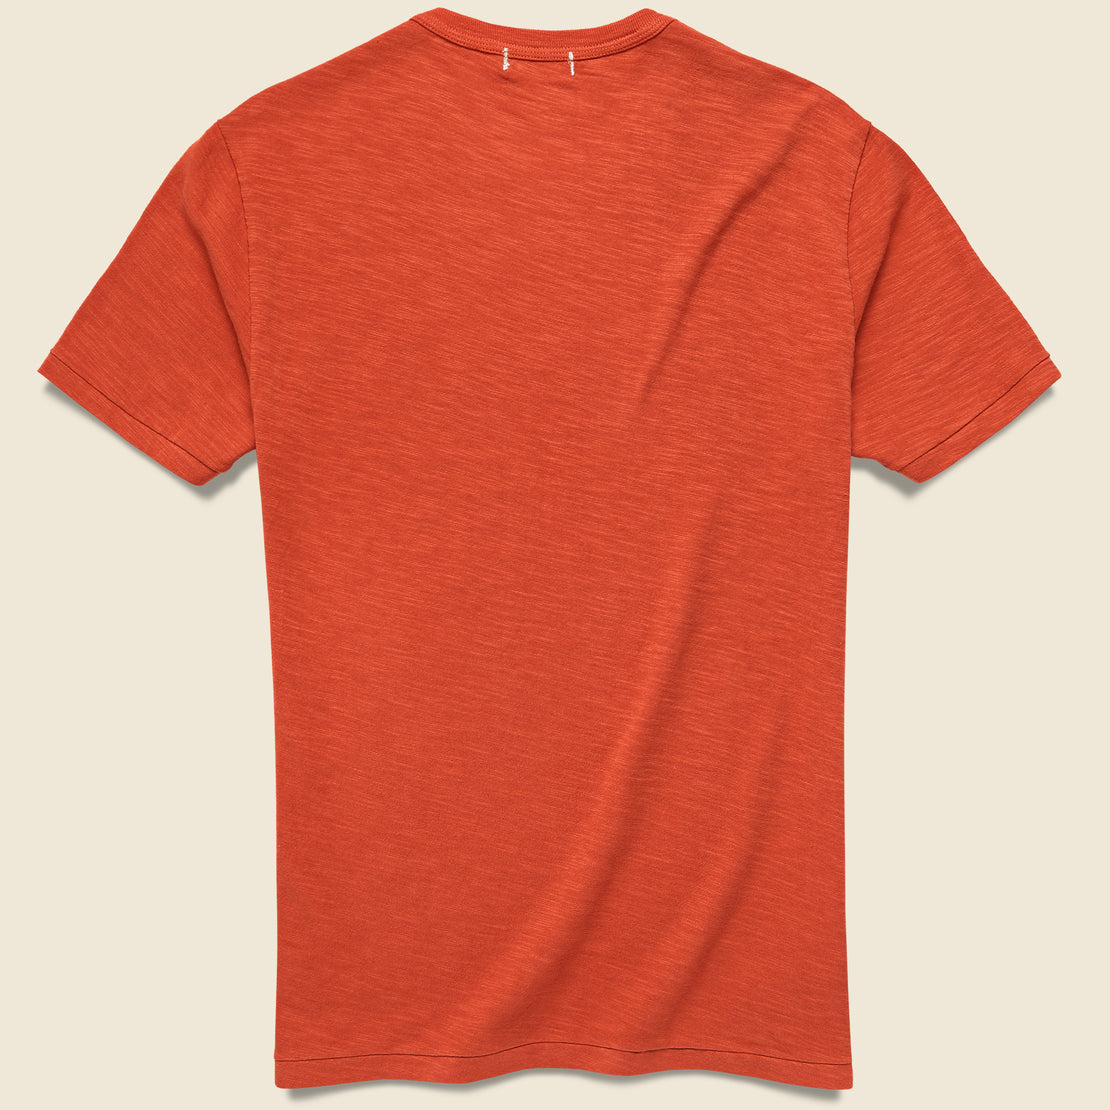 Standard Crew Tee - Barn Red - Alex Mill - STAG Provisions - Tops - S/S Tee